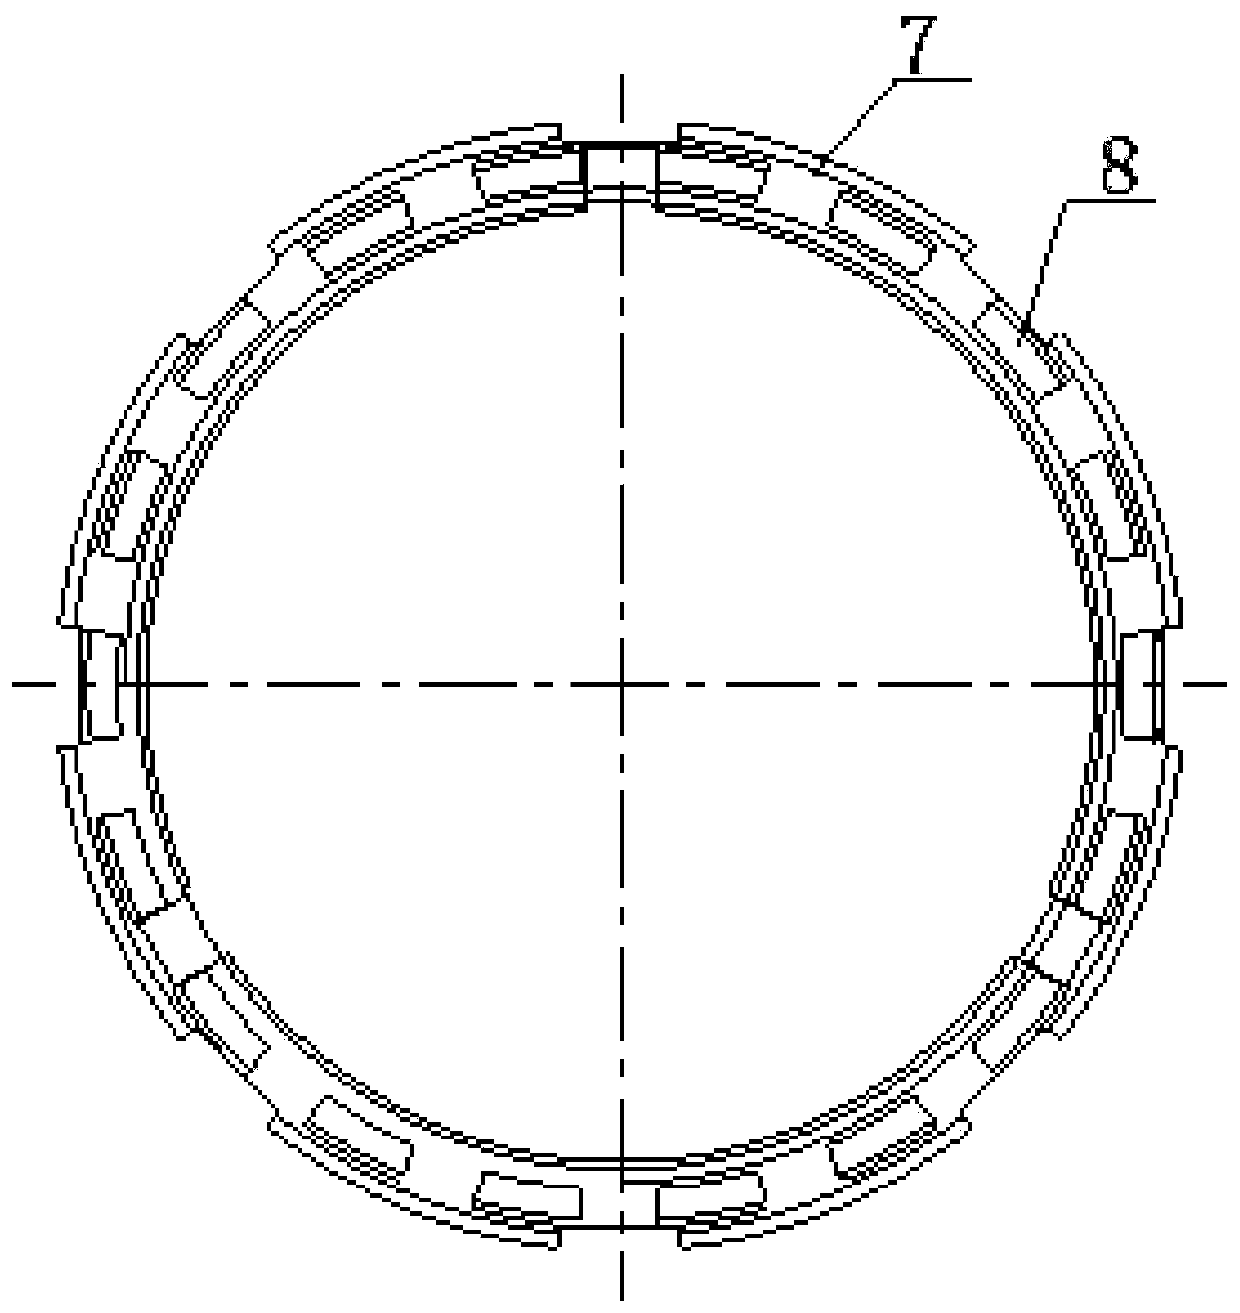 Engine rotor test lead structure